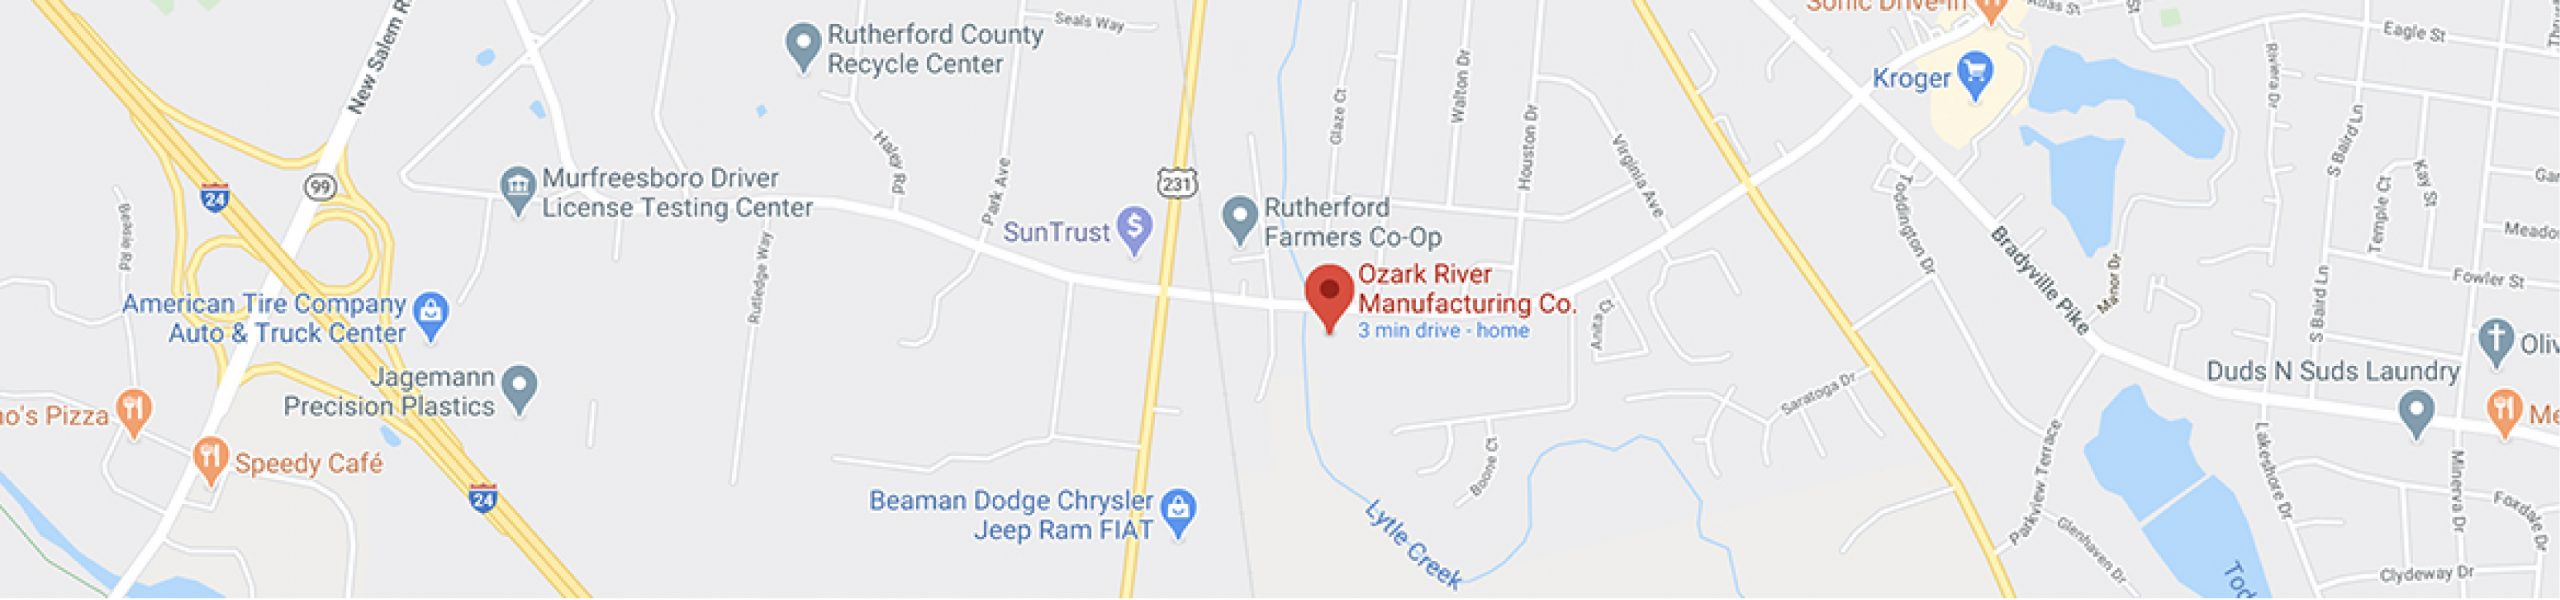 Google map showing where Ozark River Manufacturing is located